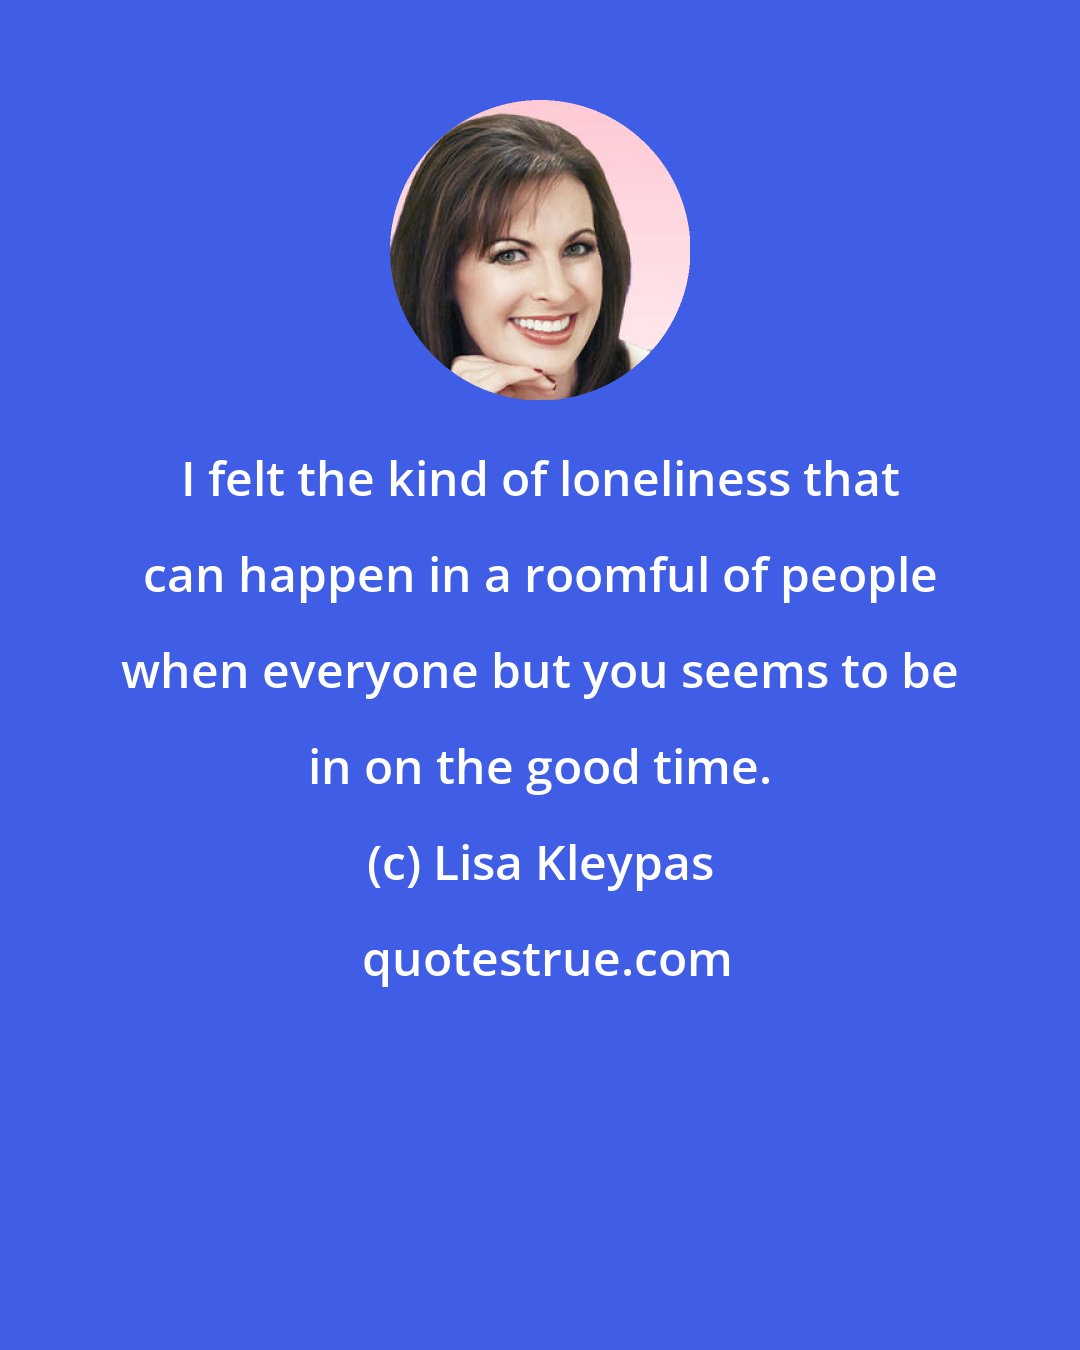 Lisa Kleypas: I felt the kind of loneliness that can happen in a roomful of people when everyone but you seems to be in on the good time.